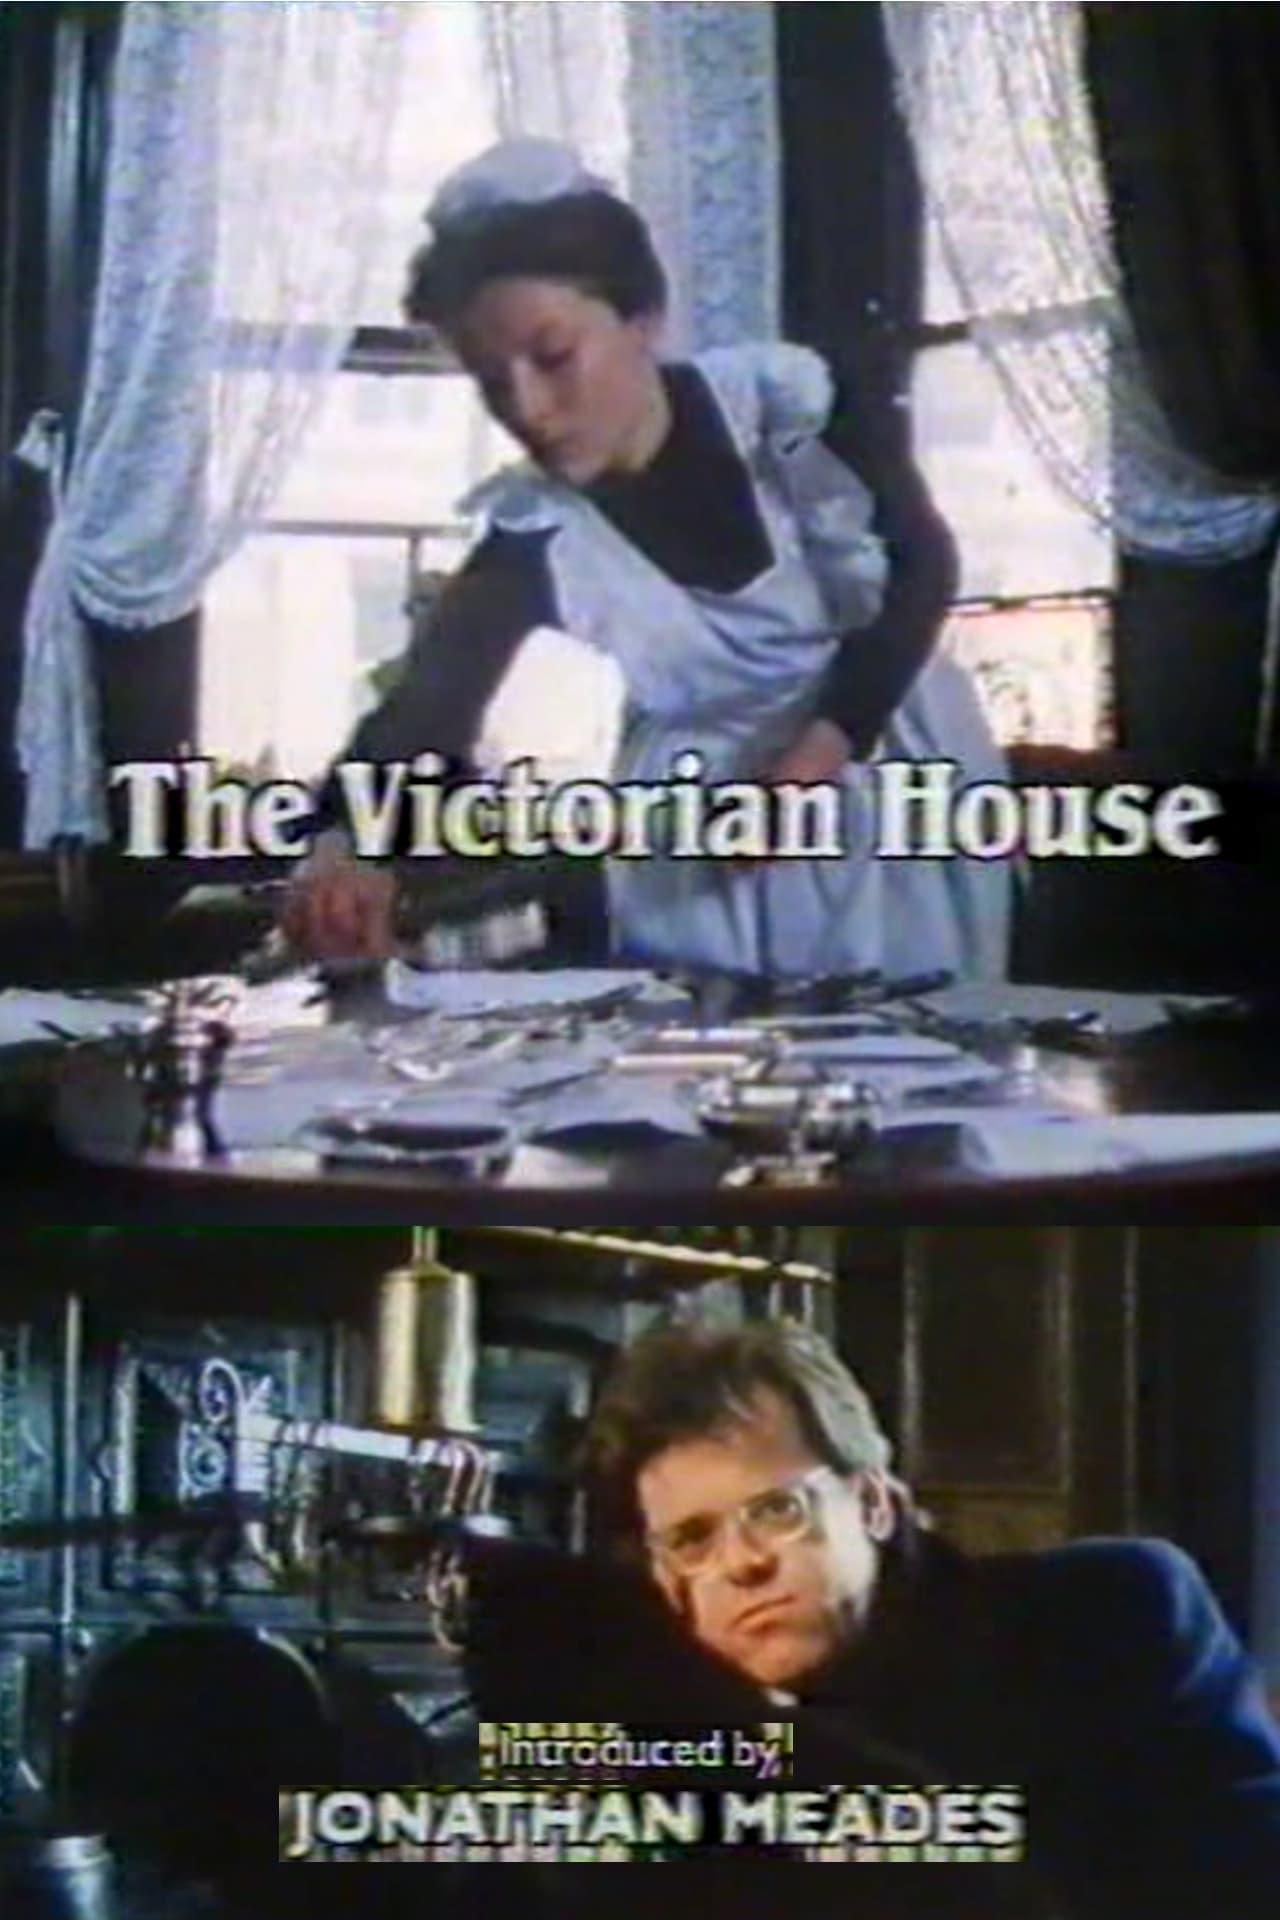 The Victorian House by Jonathan Meades